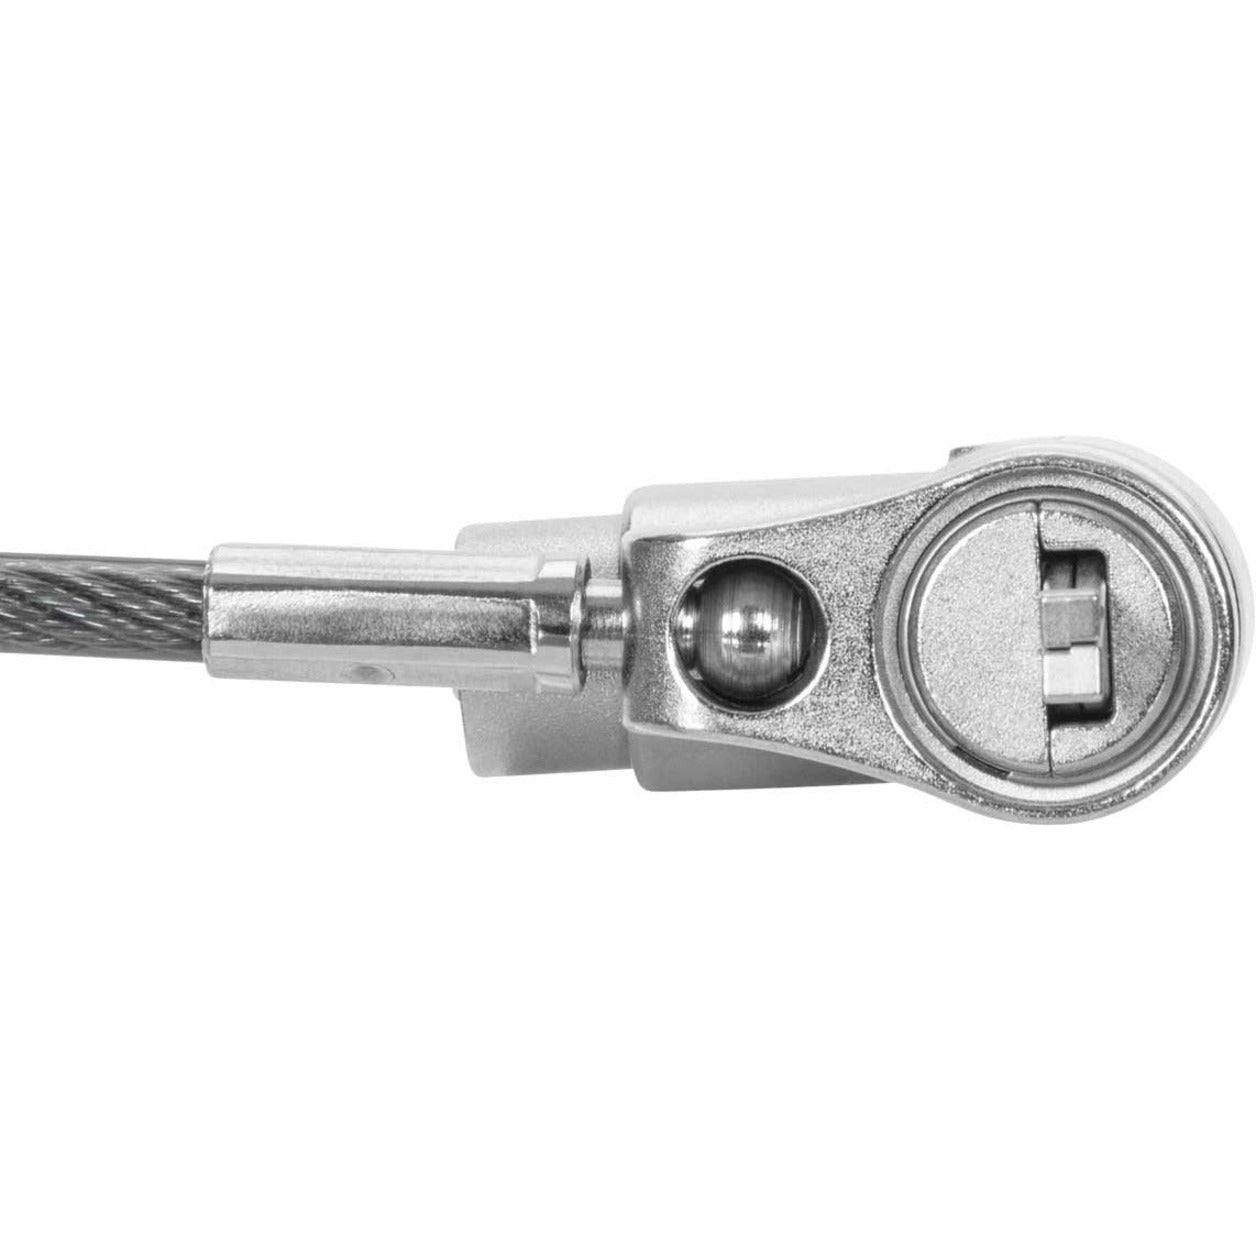 Targus ASP95MKGLX-25 DEFCON Ultimate Universal Master Keyed Lock, 6.50 ft Cable Length, 2 Year Warranty